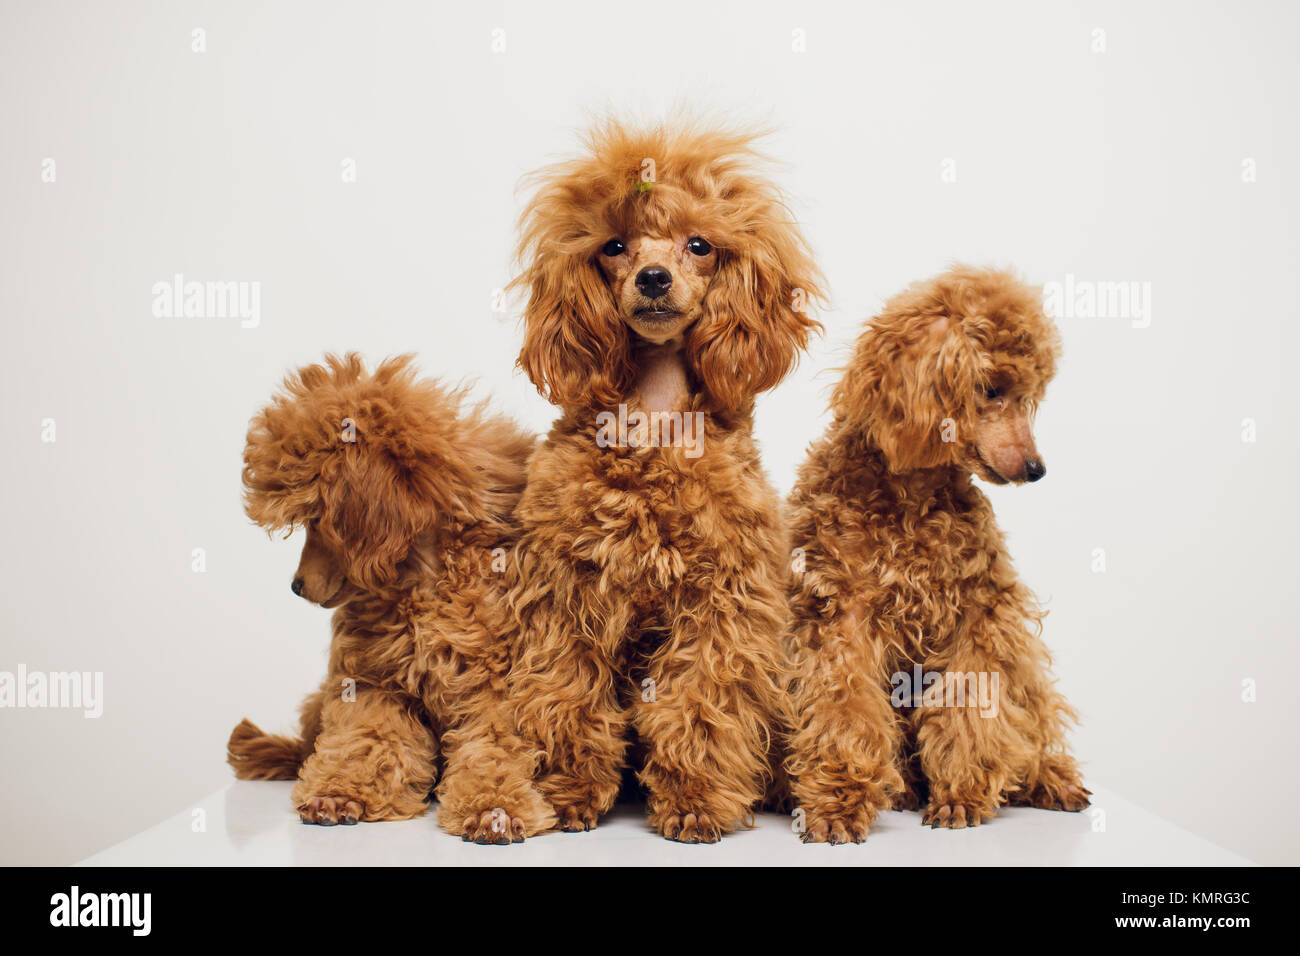 Adorable Mini Toy Poodle With Golden Brown Fur On A White Background Stock  Photo - Alamy